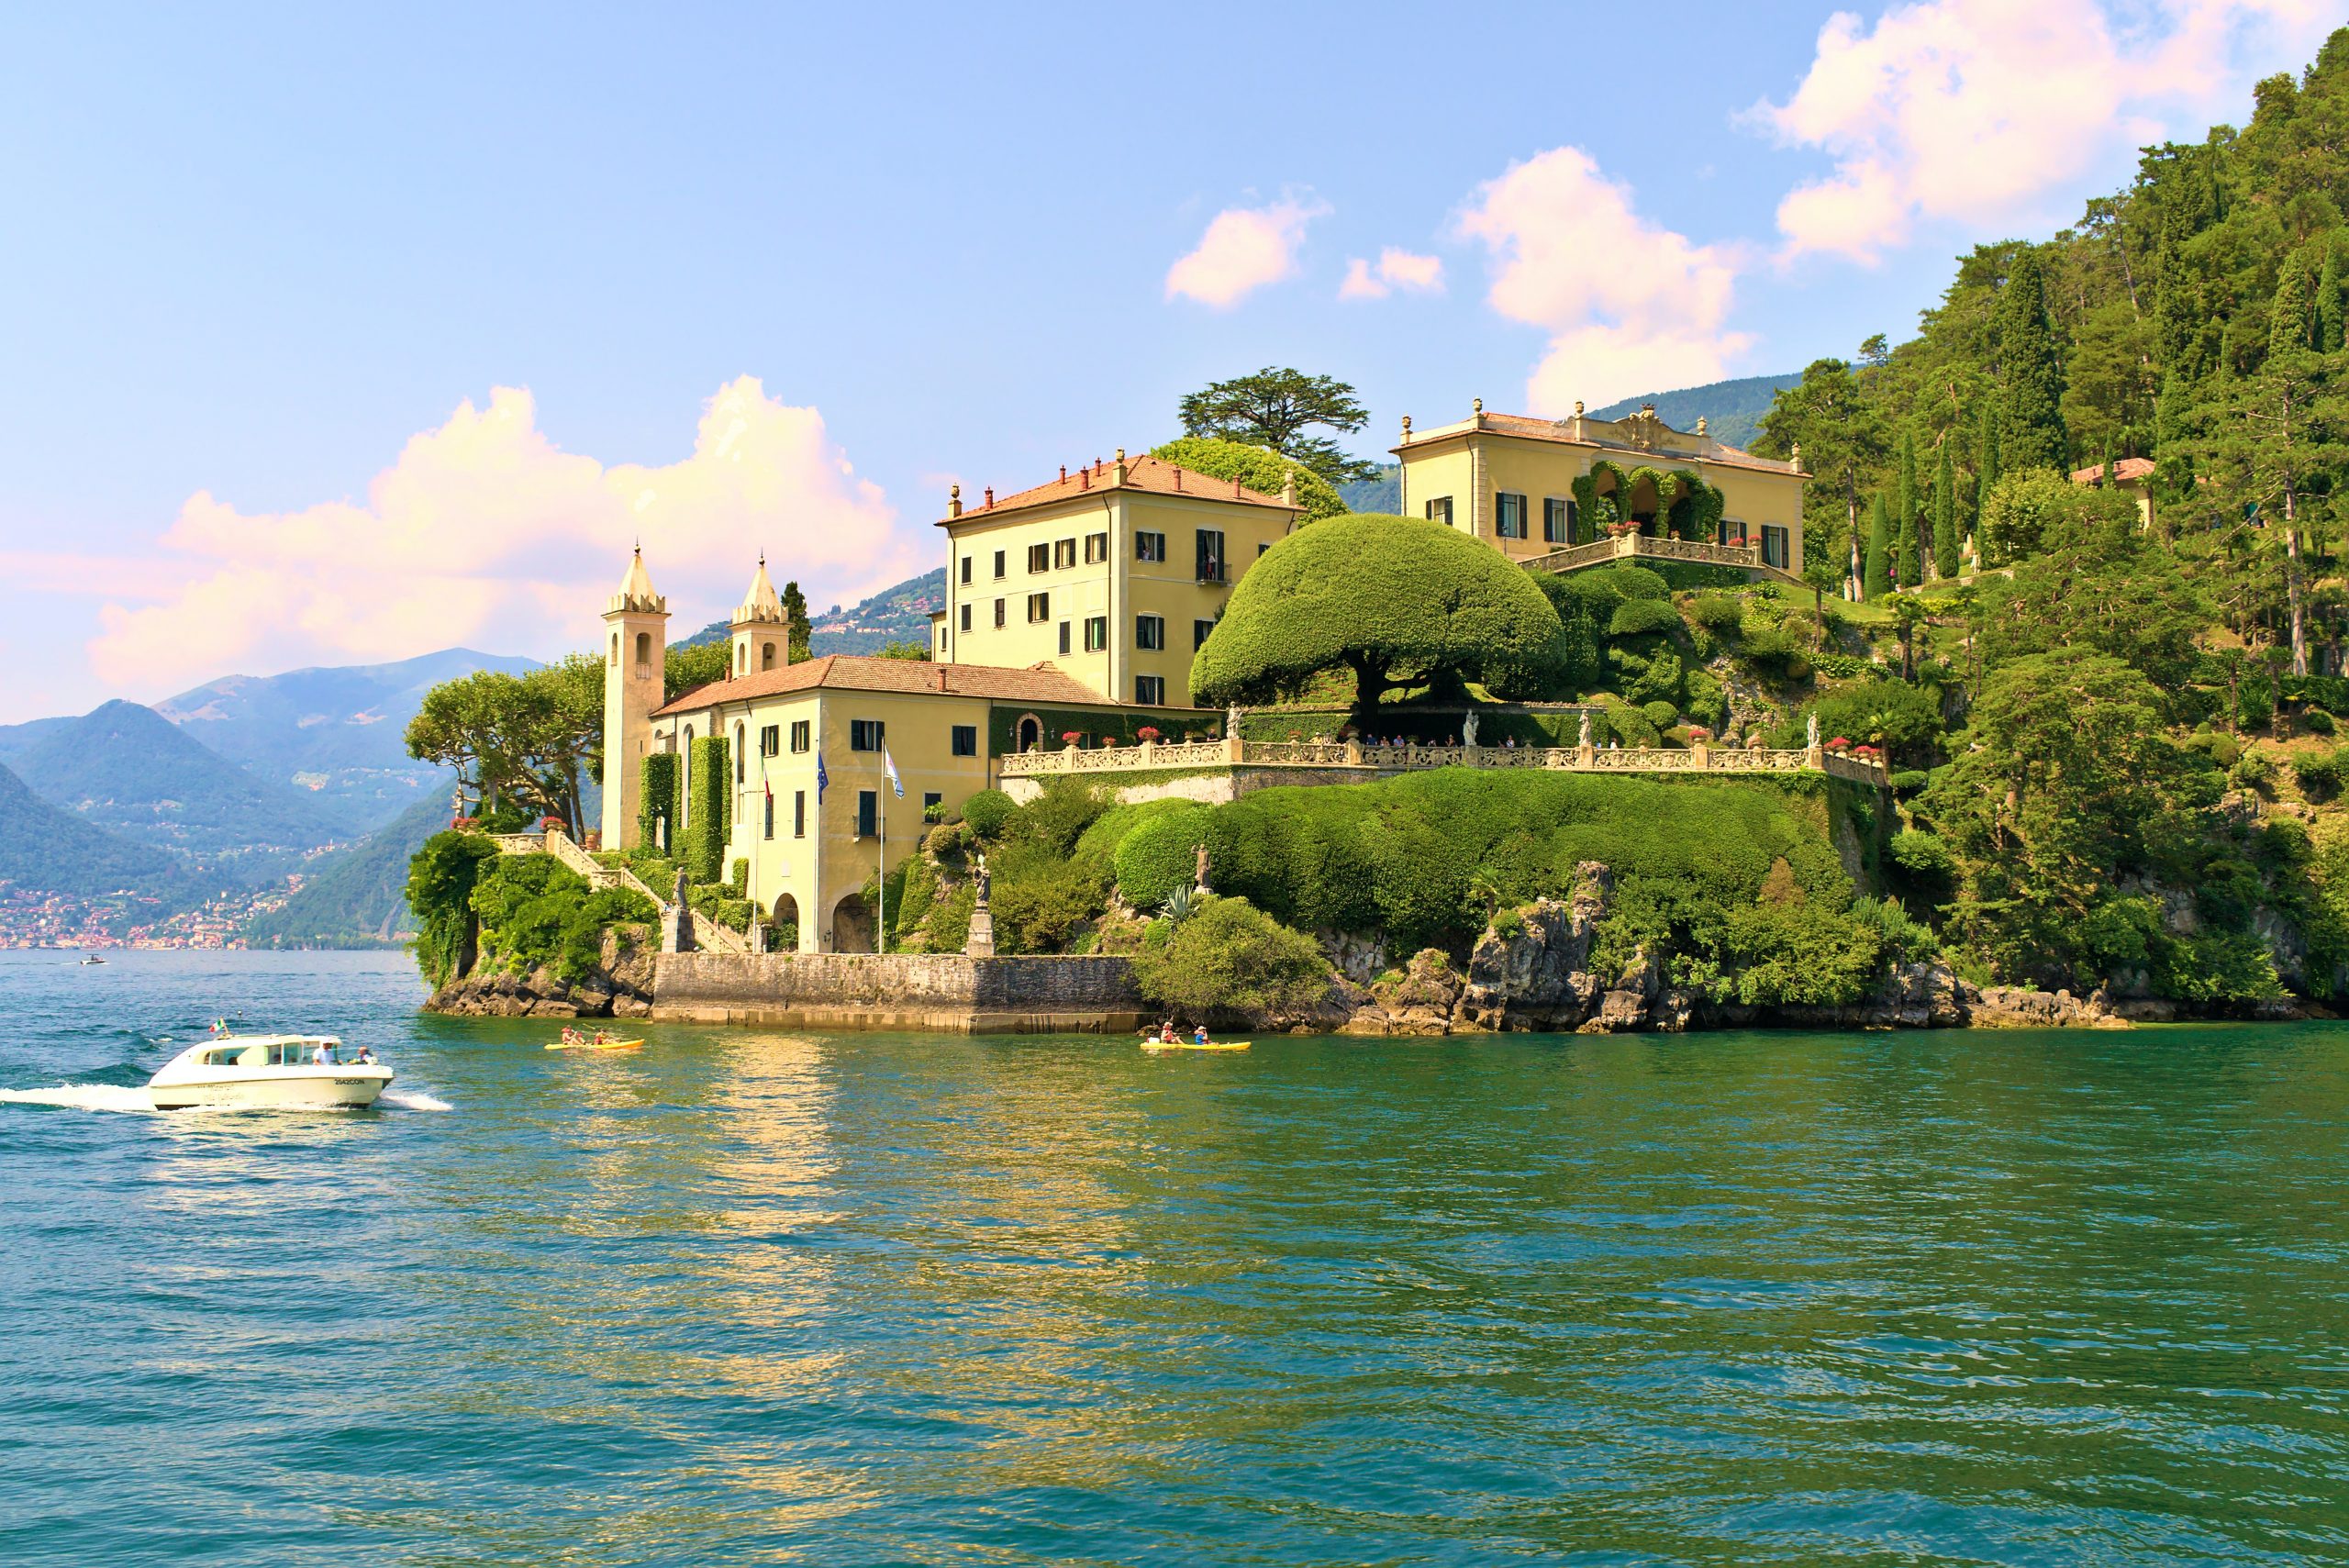 A yellow italian villa with an orange terracotta roof and manicured gardens set above a blue lake with a speed boat driving past in the foreground.